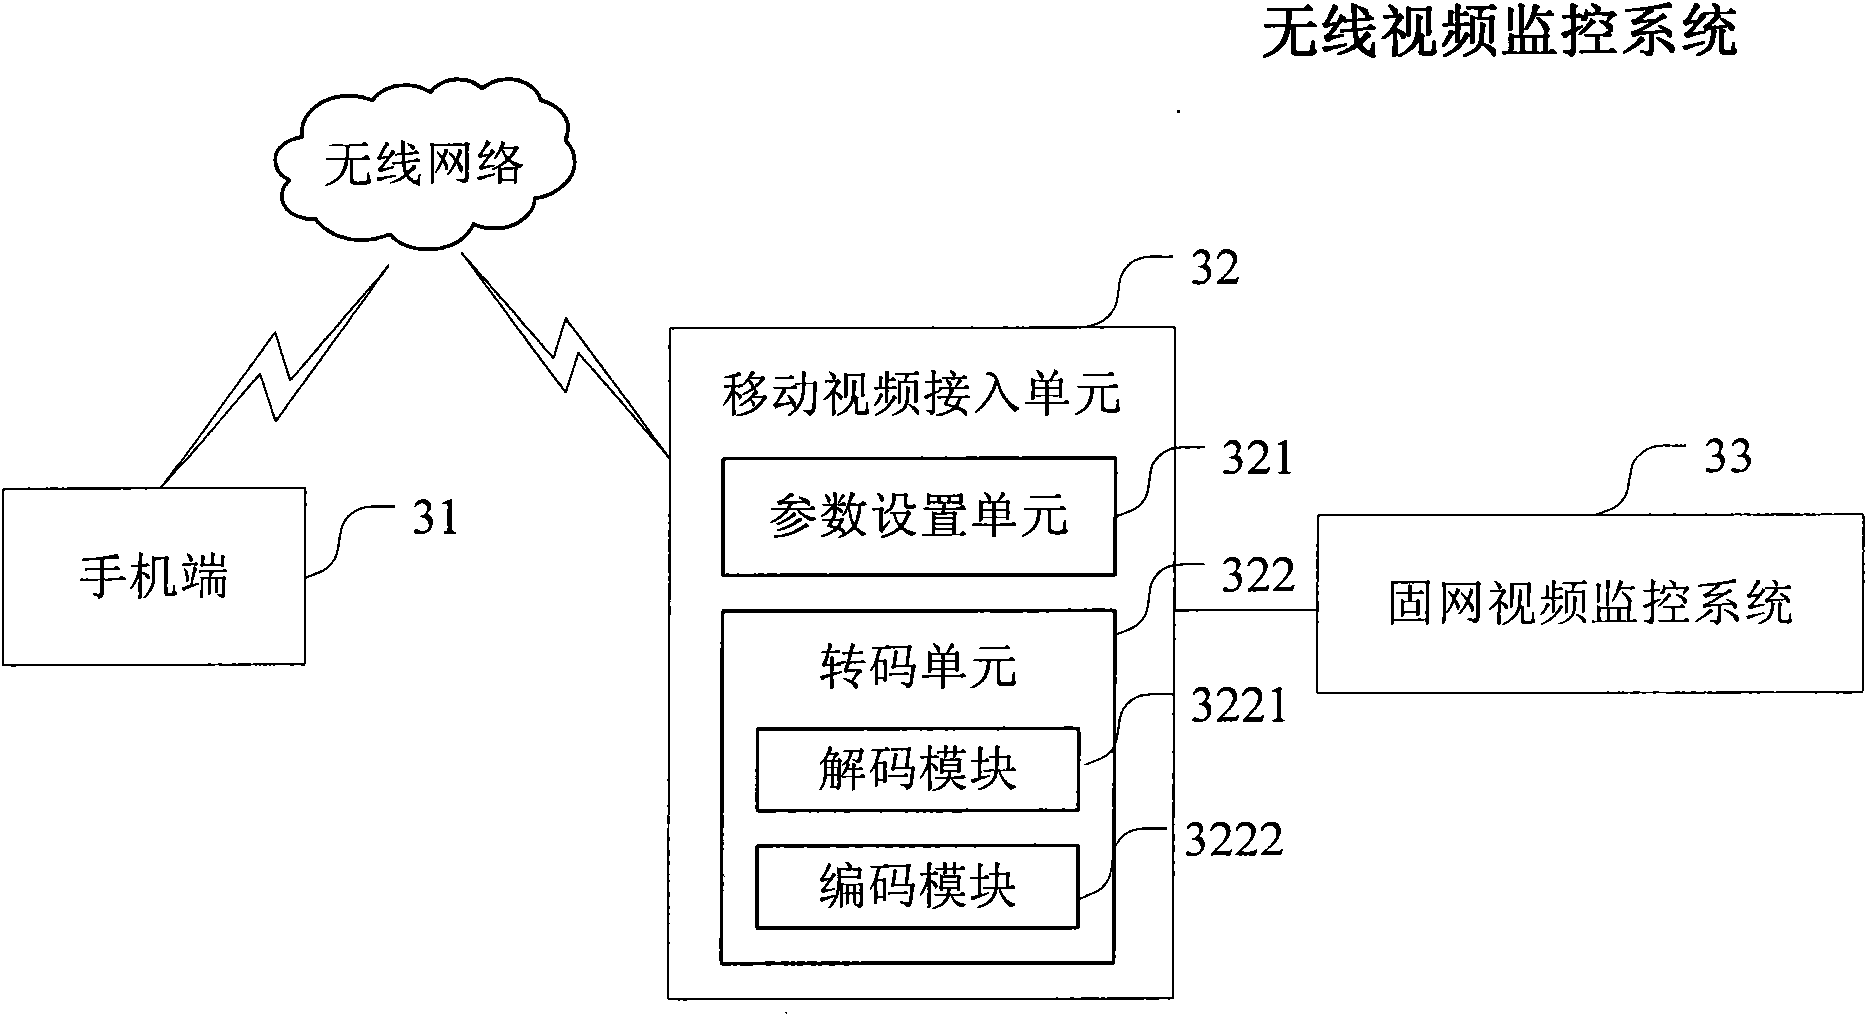 Wireless video monitoring system and method for dynamically regulating code stream according to network state